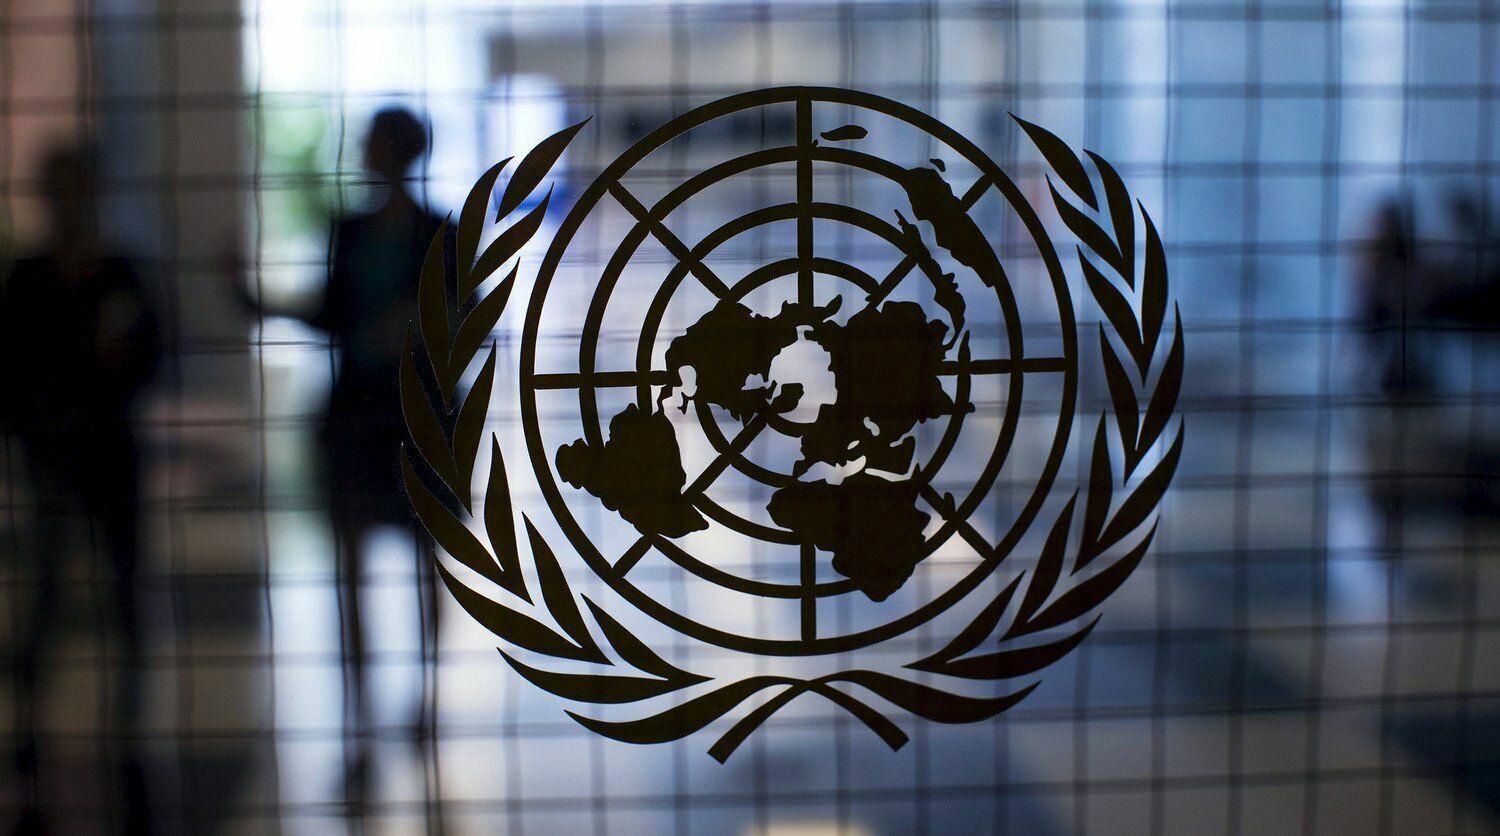 The UN Security Council did not accept the Russian project on American biolaboratories in Ukraine